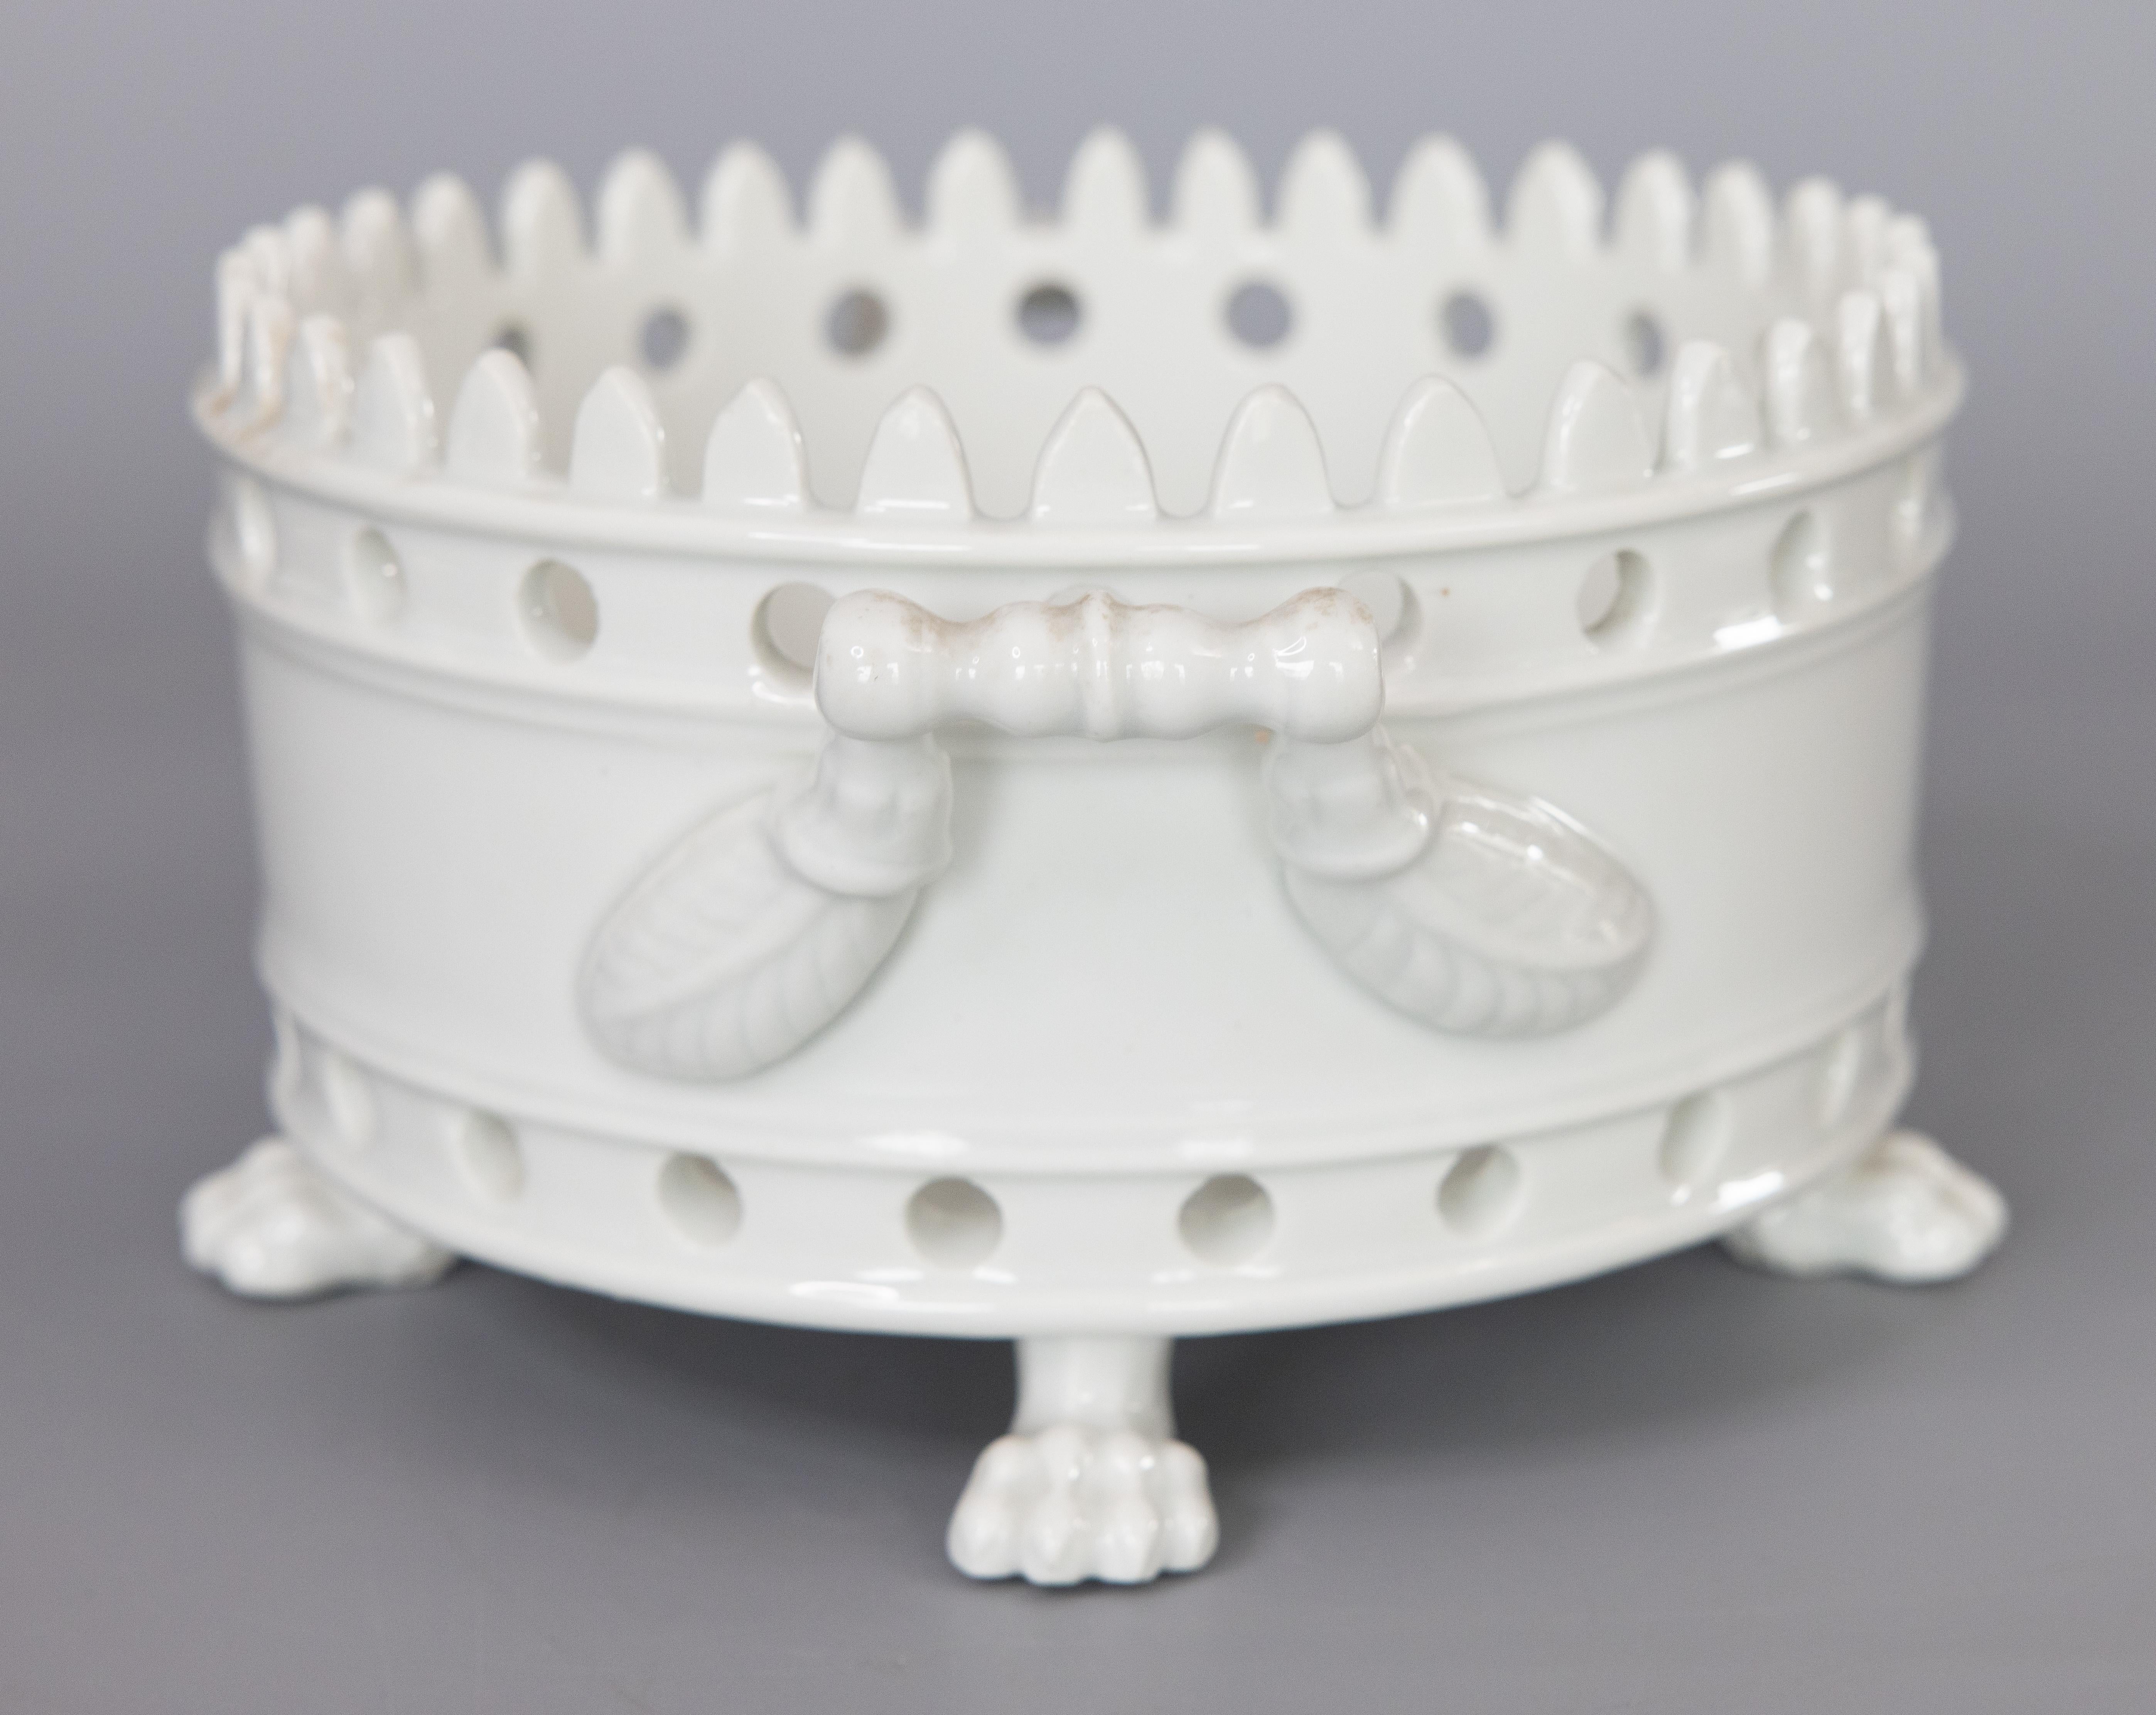 A lovely antique 19th-Century French white porcelain cachepot / jardiniere / planter. No maker's mark. This fine cachepot has a beautiful pierced design, crowned rim, scrolling leaf handles, and charming paw feet. It could be used as a planter with